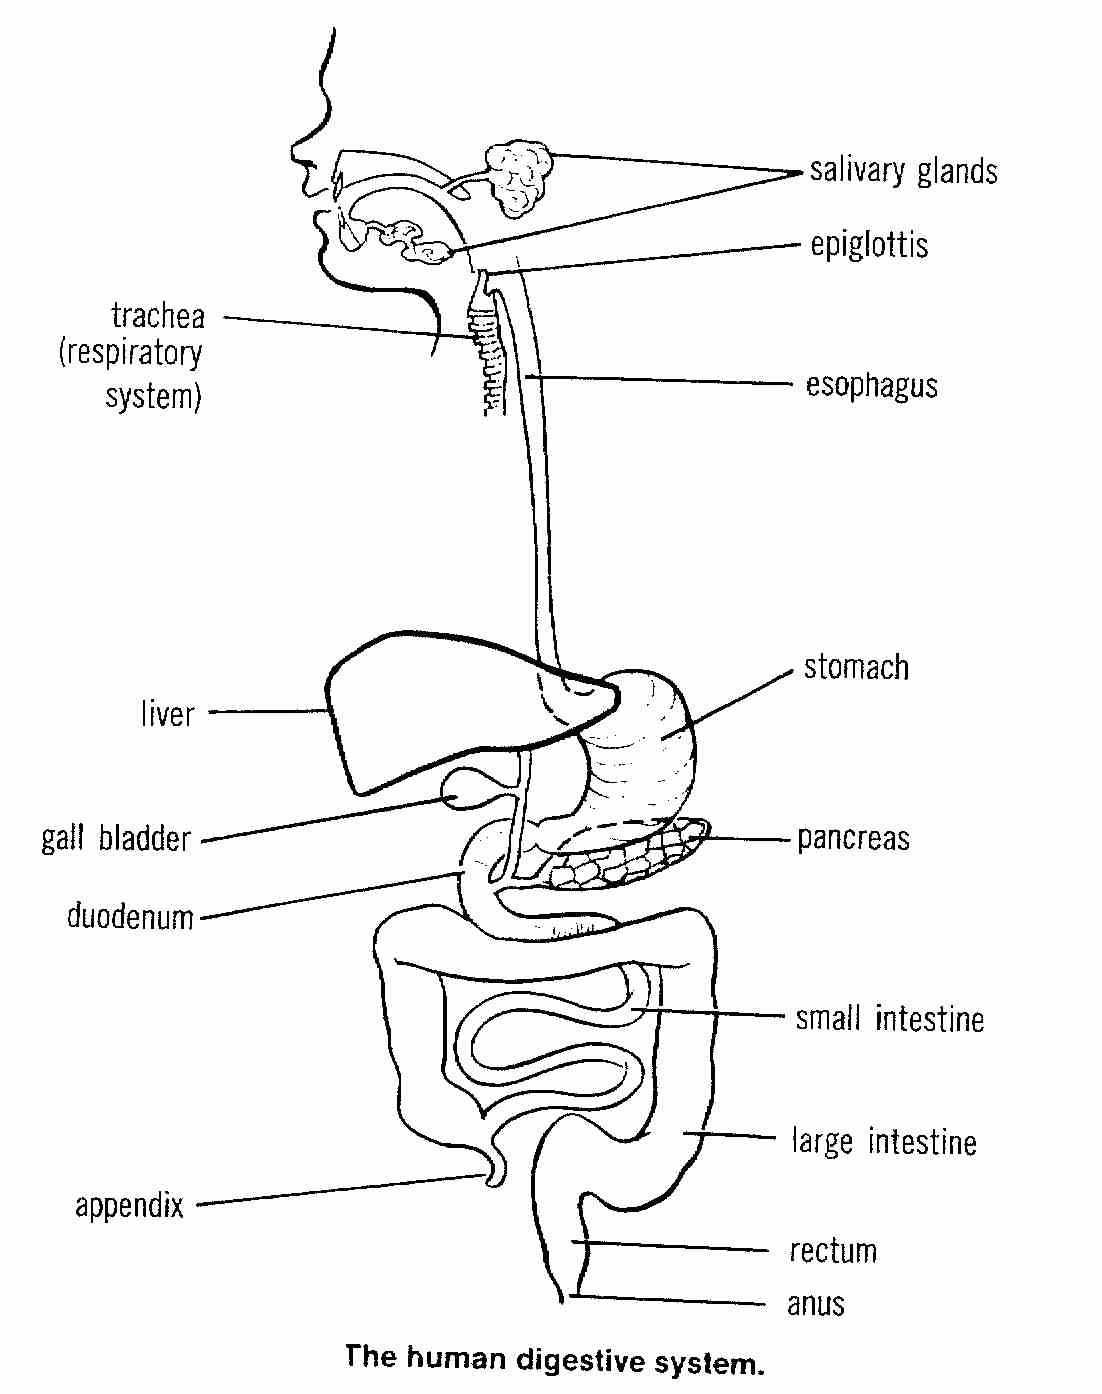 Diagram Of Digestive System Of Human Being - Human Anatomy Diagram